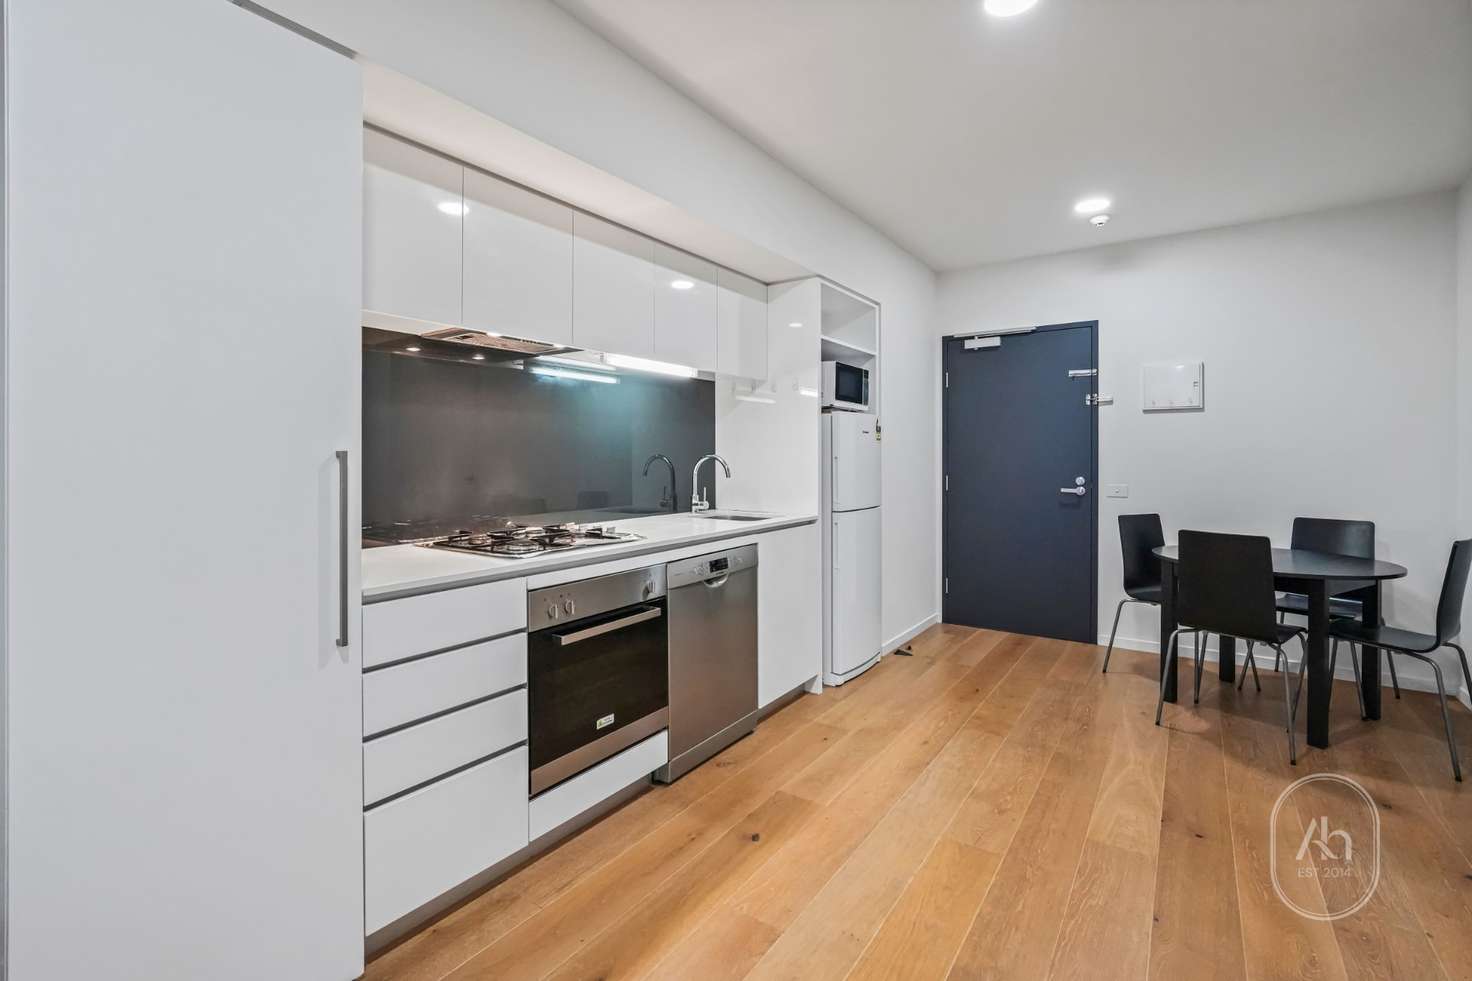 Main view of Homely apartment listing, 211/525 Rathdowne Street, Carlton VIC 3053